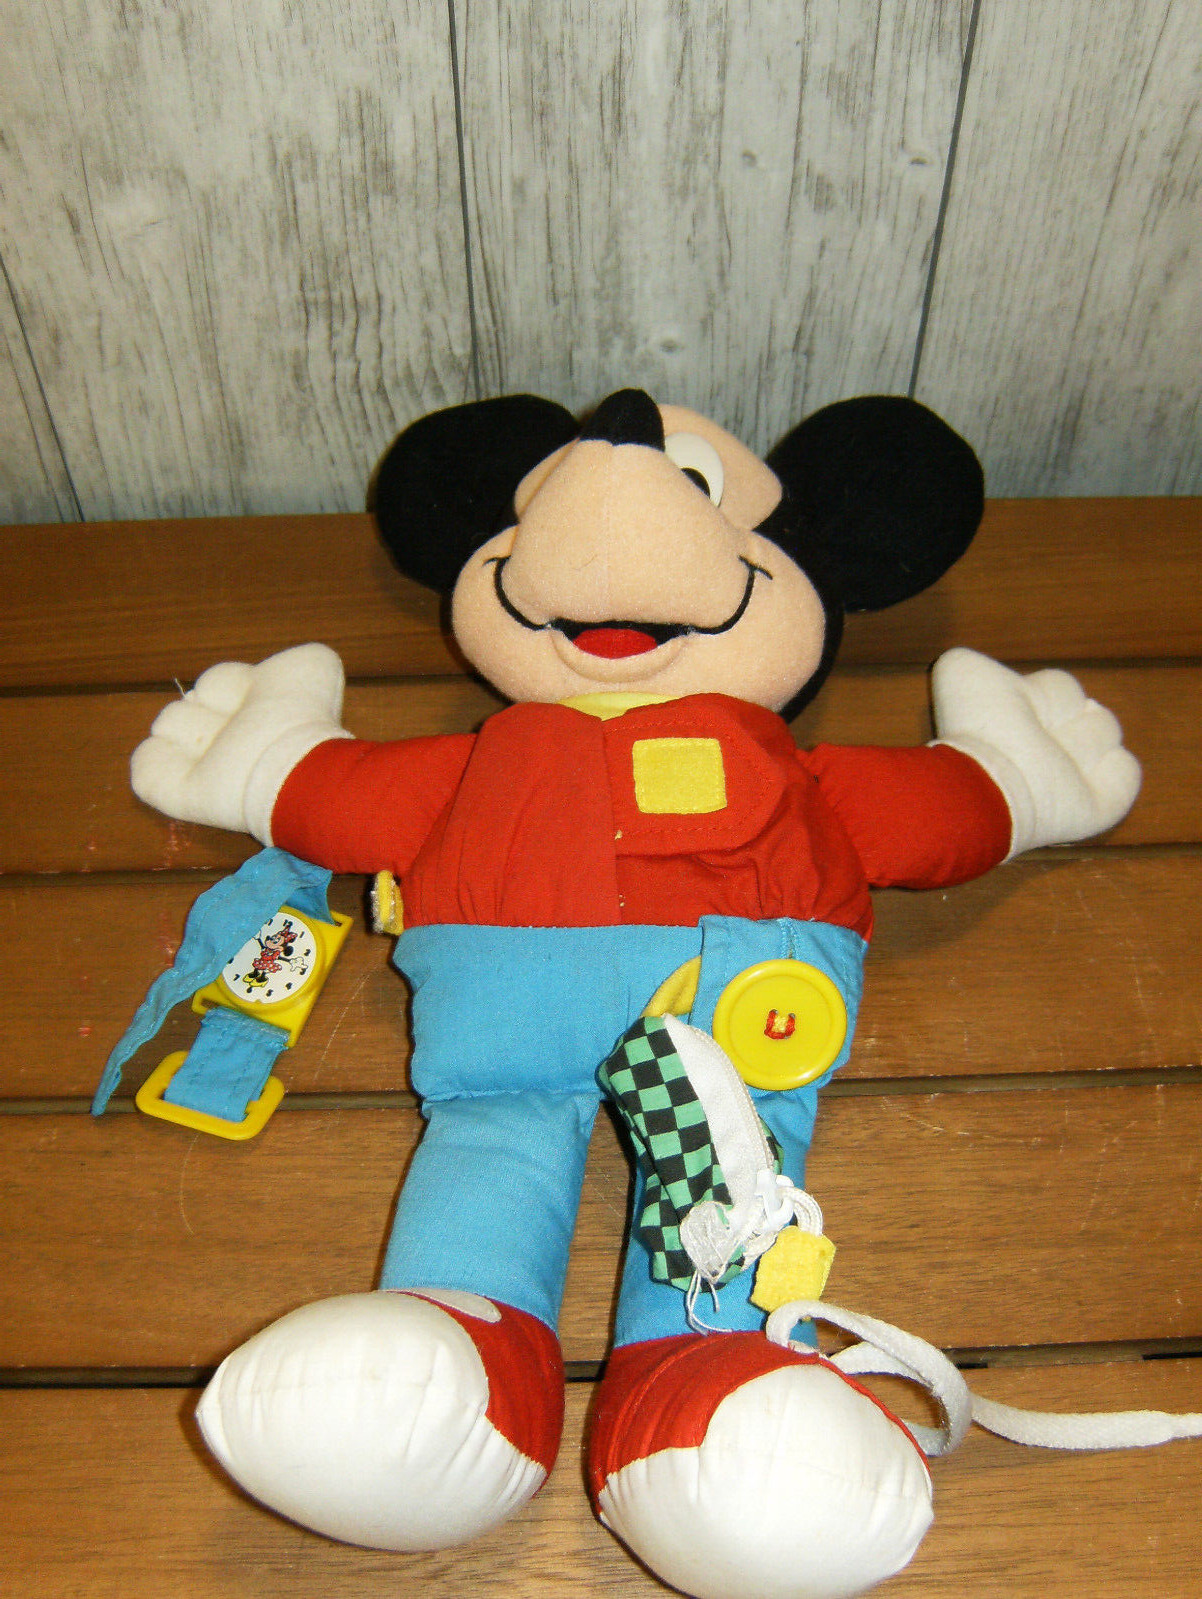 Vintage Disney Mickey Mouse Mattel Plush Educational Learn To Dress Doll